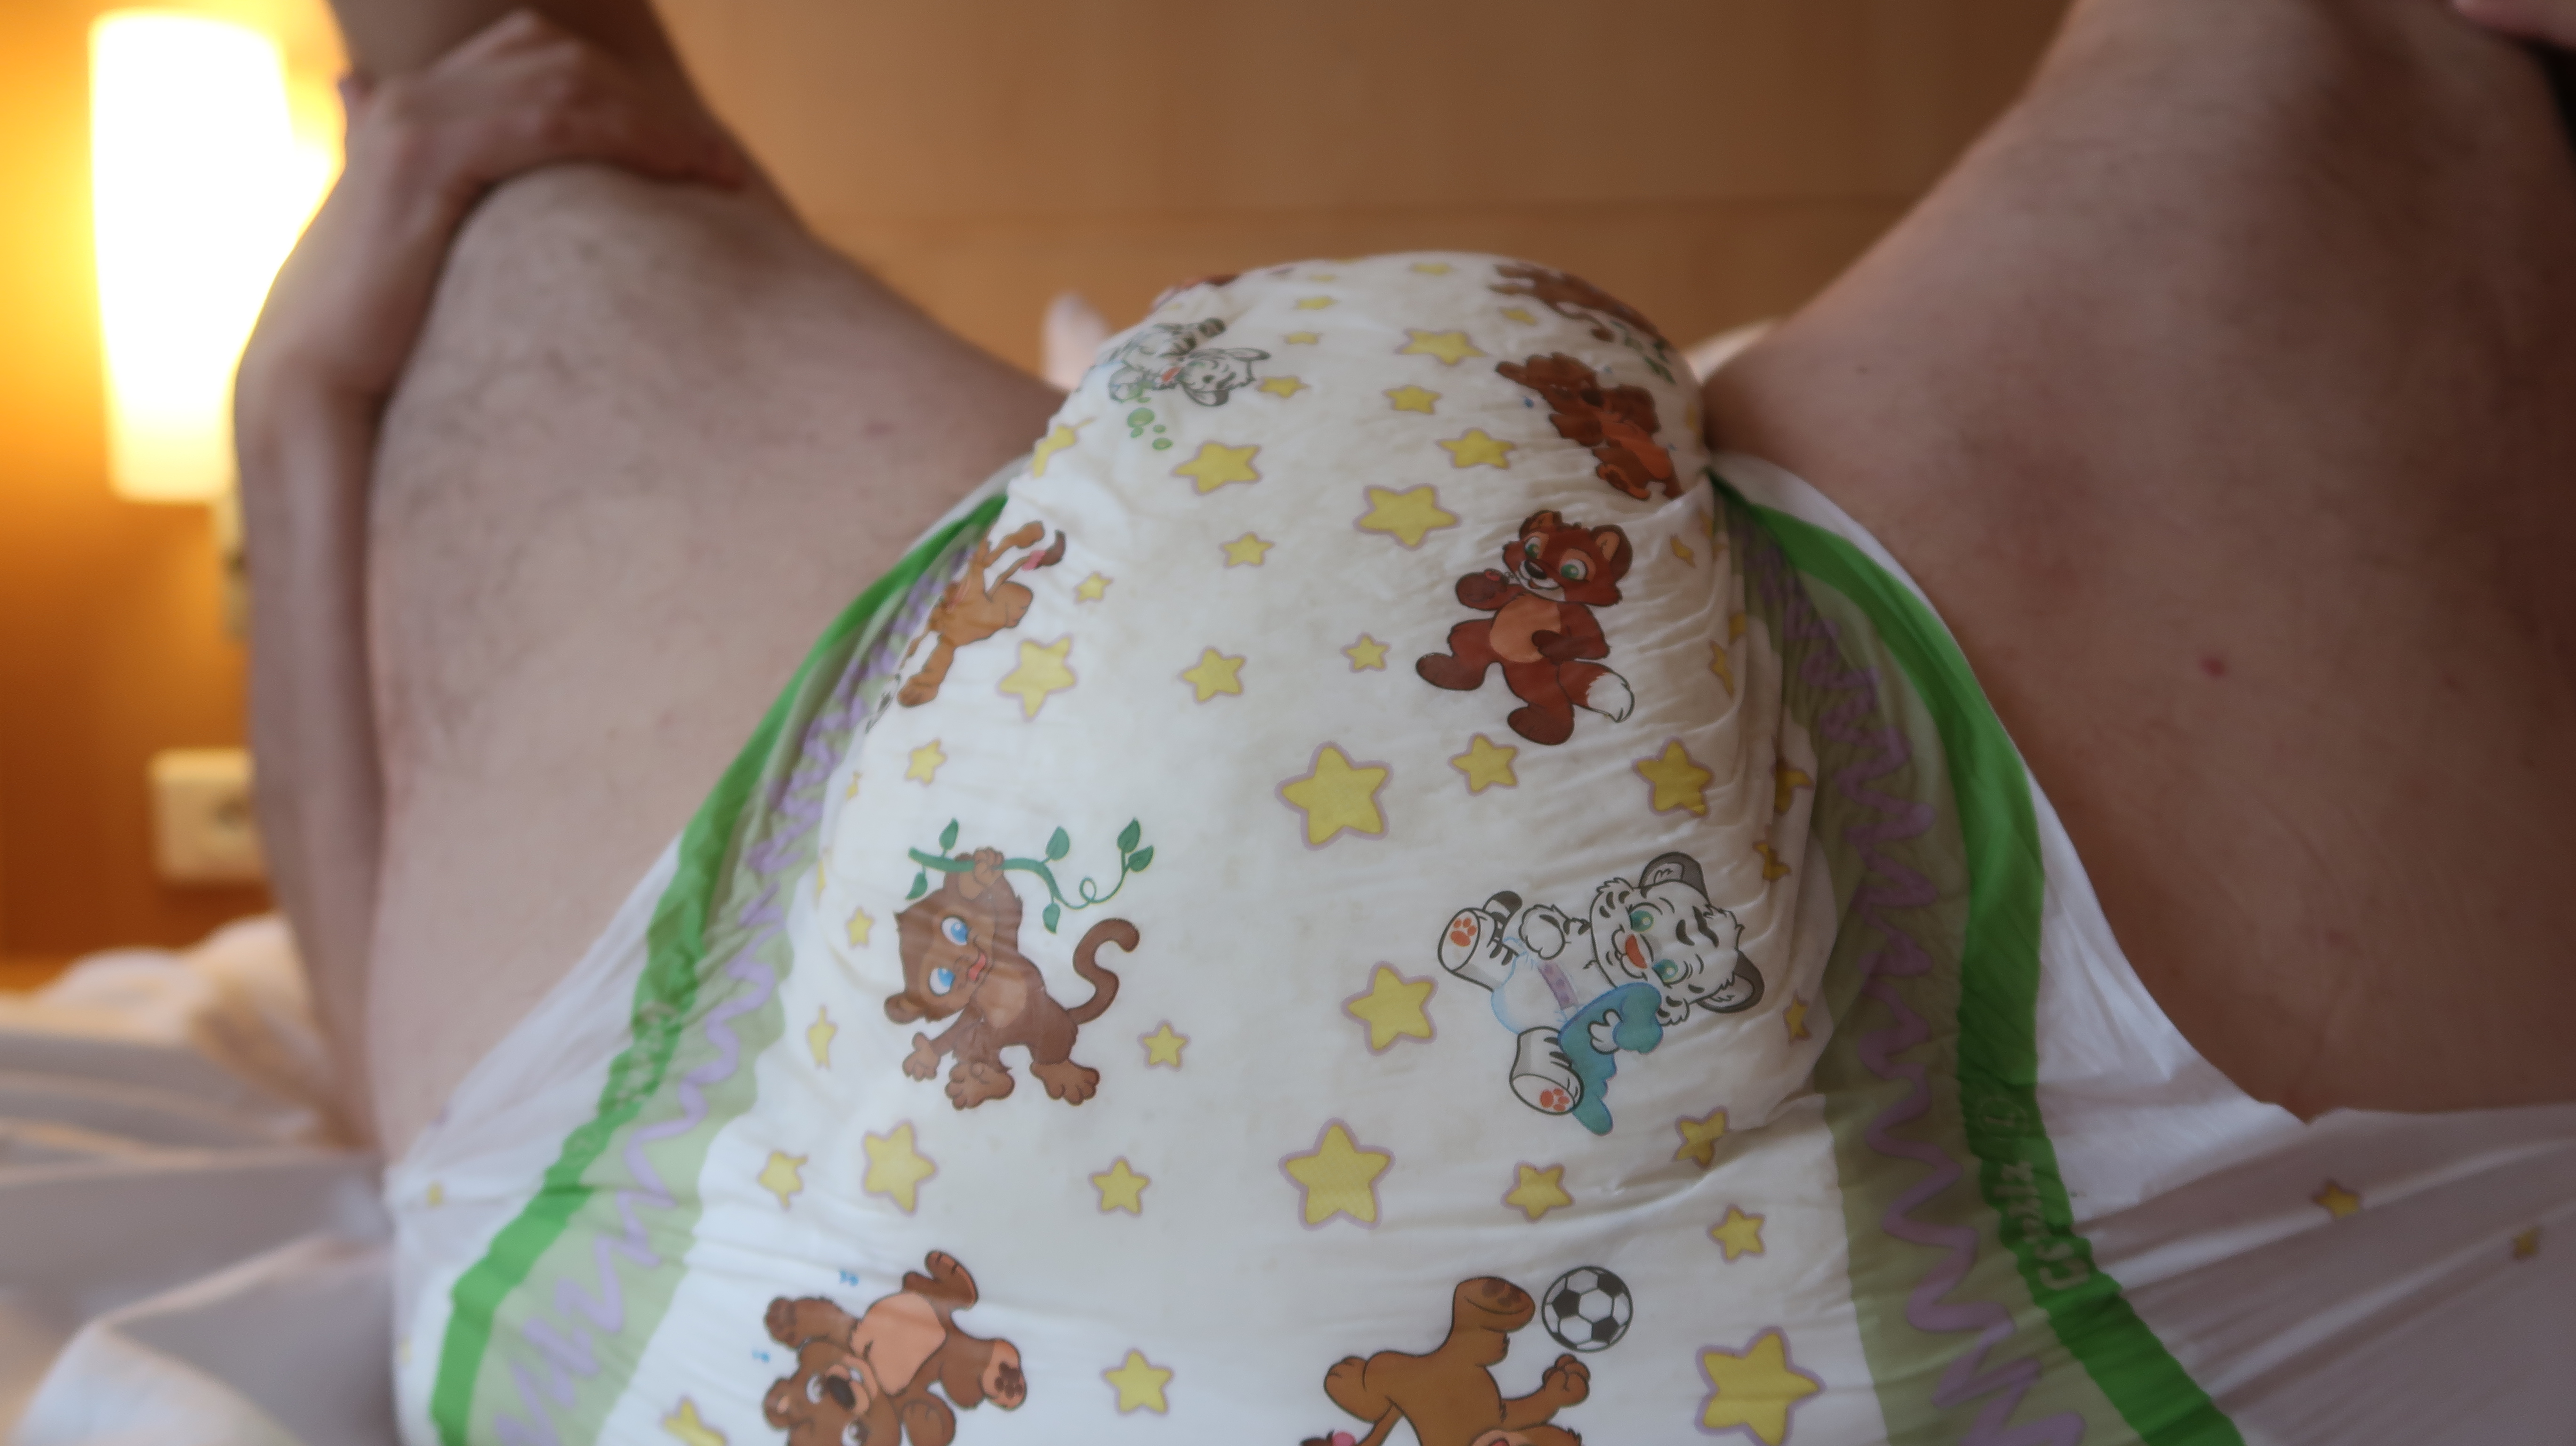 At wake up, messing my diaper for the second time